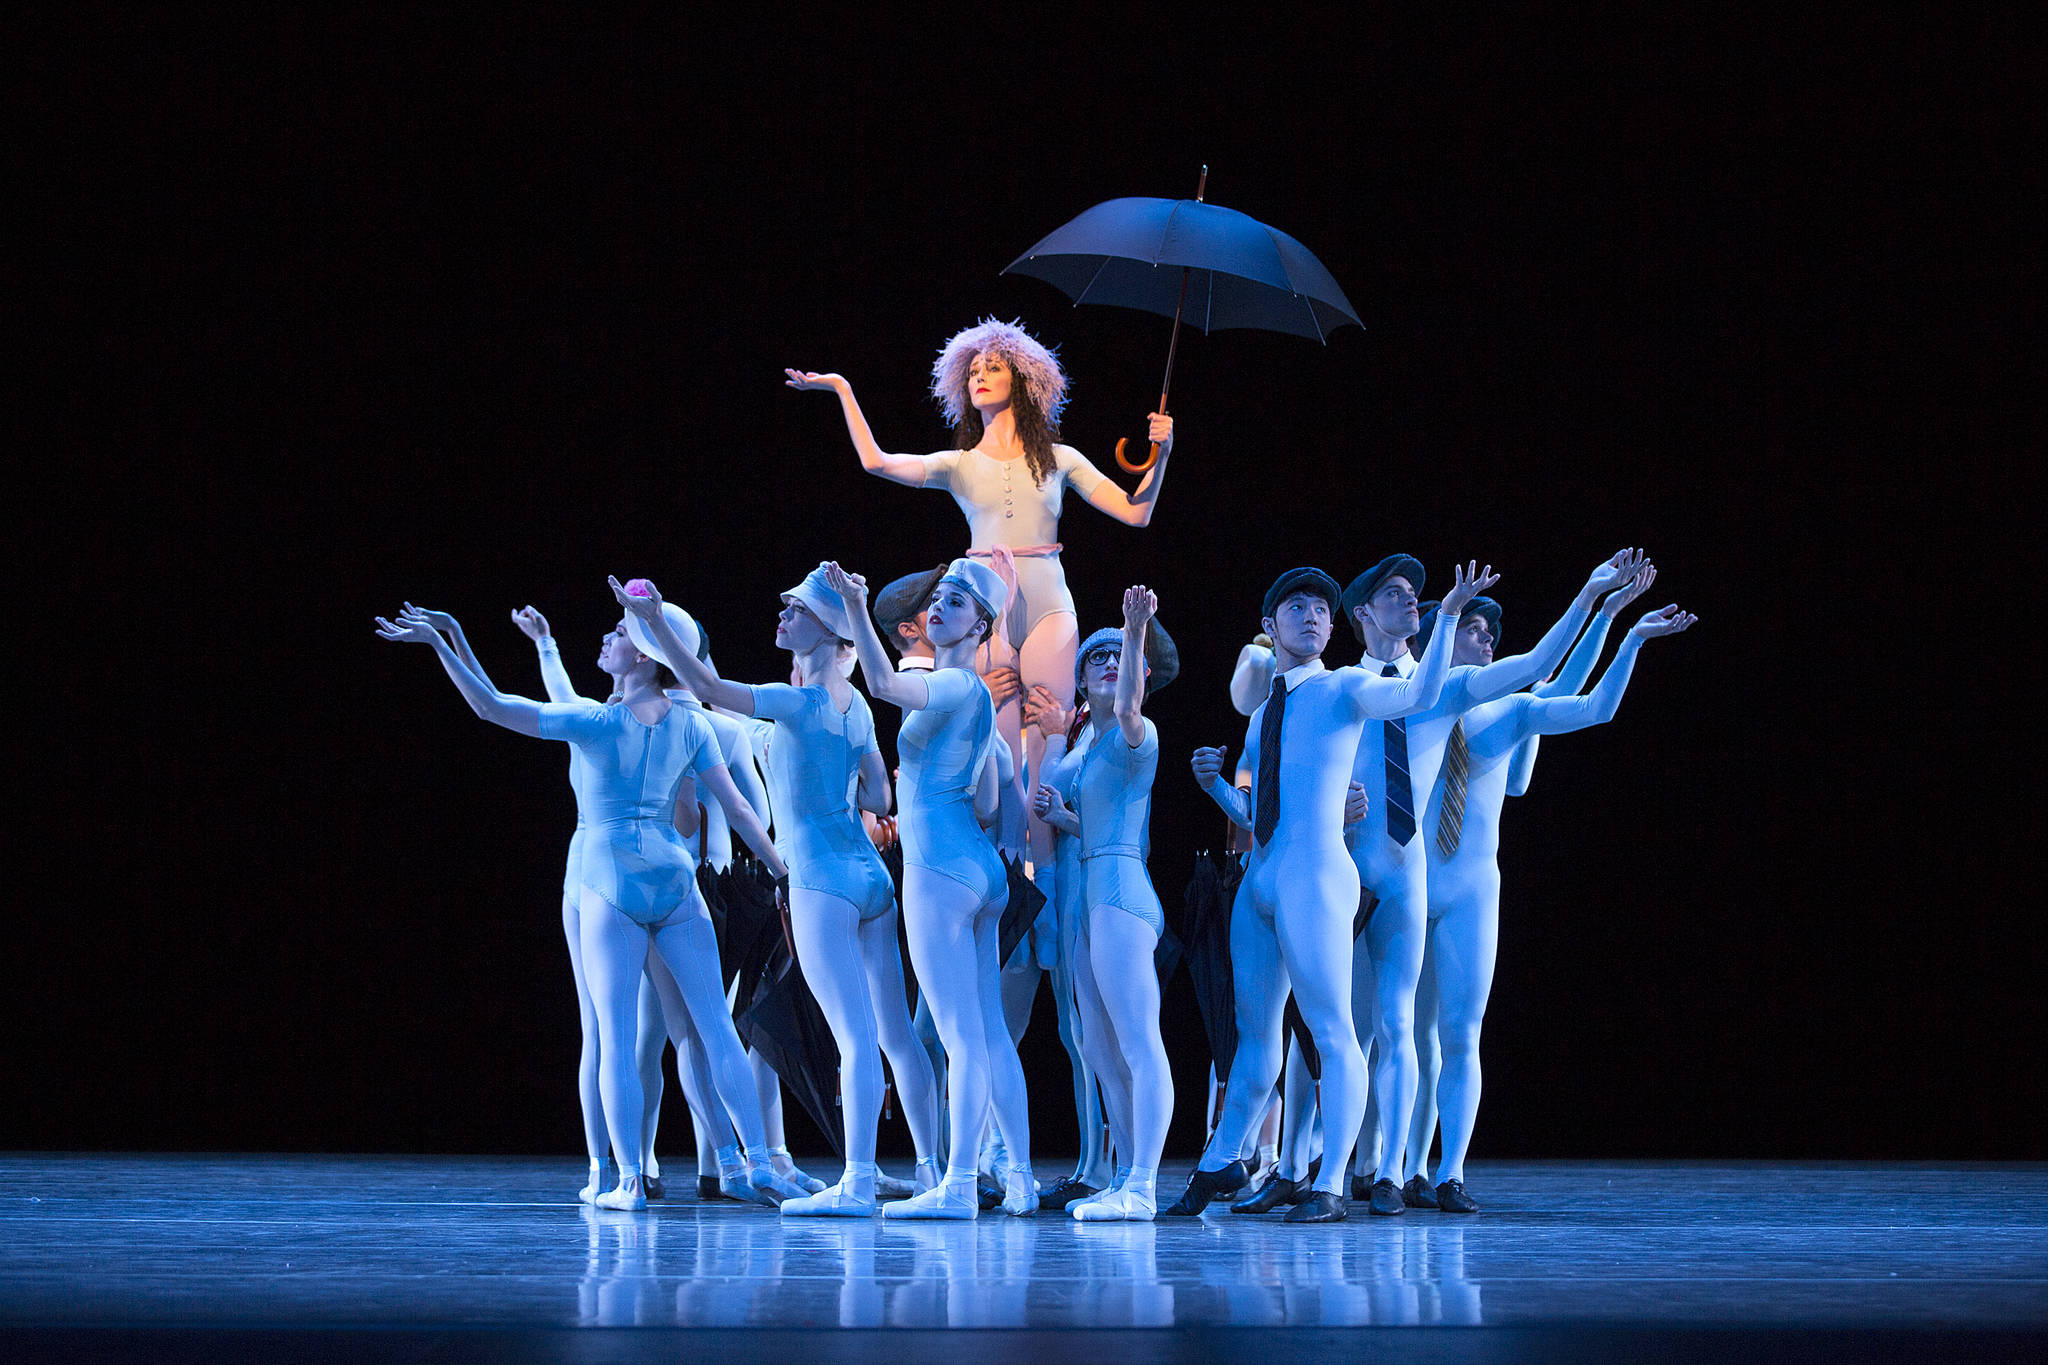 Principal dancer Sarah Ricard Orza ignores indoor umbrella superstitions in Jerome Robbins’ ‘The Concert (or, The Perils of Everybody).’ Photo by Angela Sterling